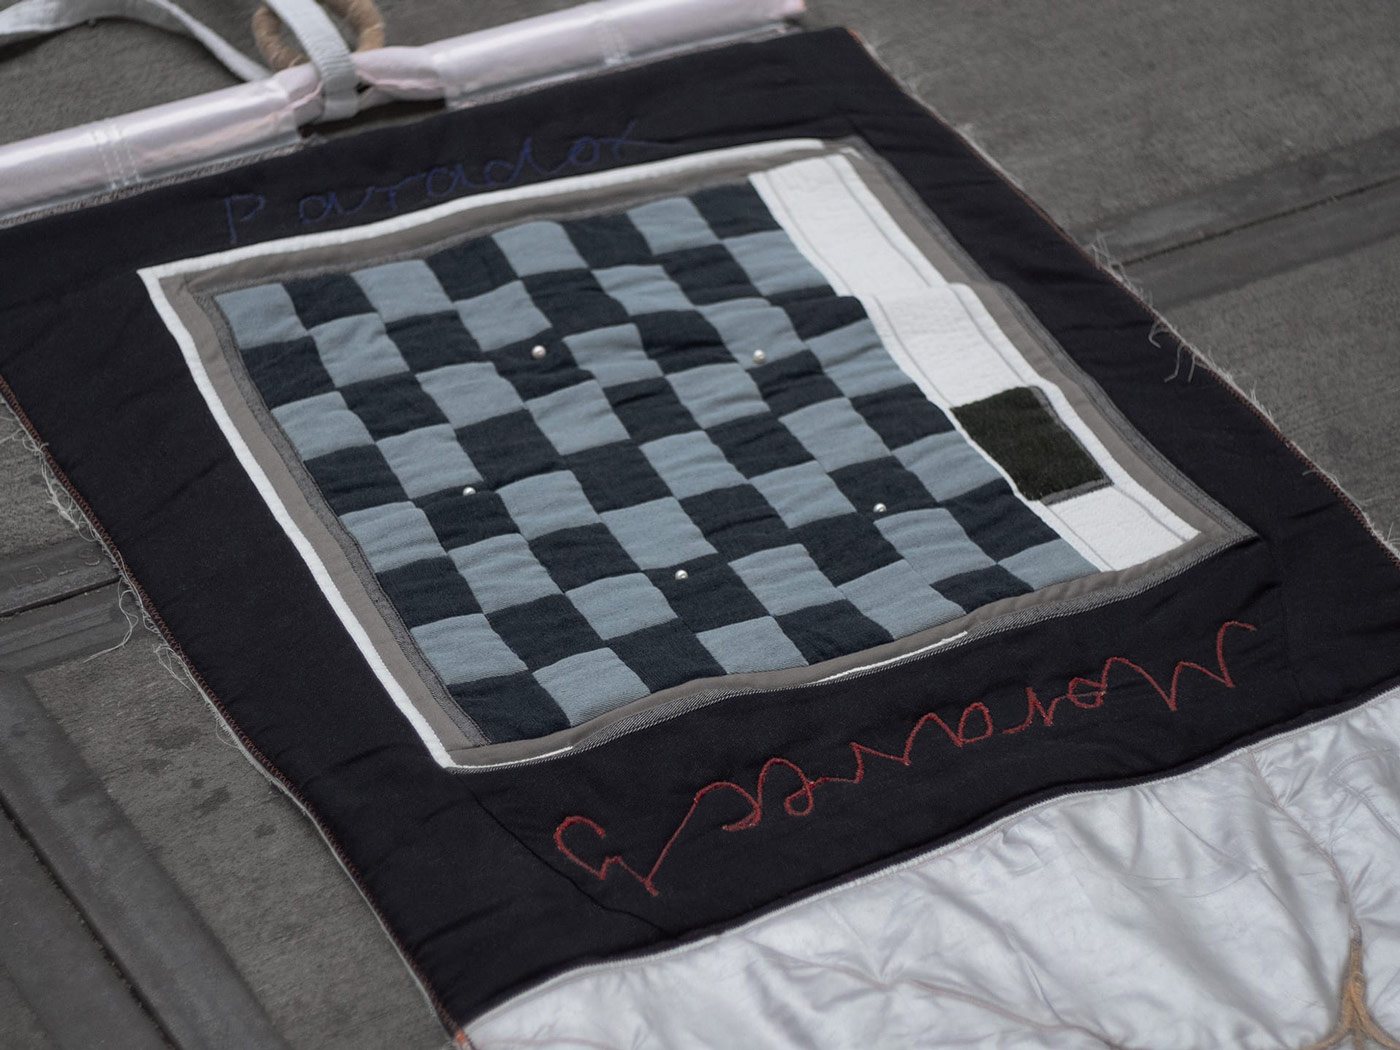 A chessboard with tiles in two different shades of blue. Five freshwater pearls can be seen in a circular arrangement on the chessboard. There is a scroll bar on the right-hand side of the chessboard. The window is framed in black fabric, with Moravec's Paradox written on the frame.